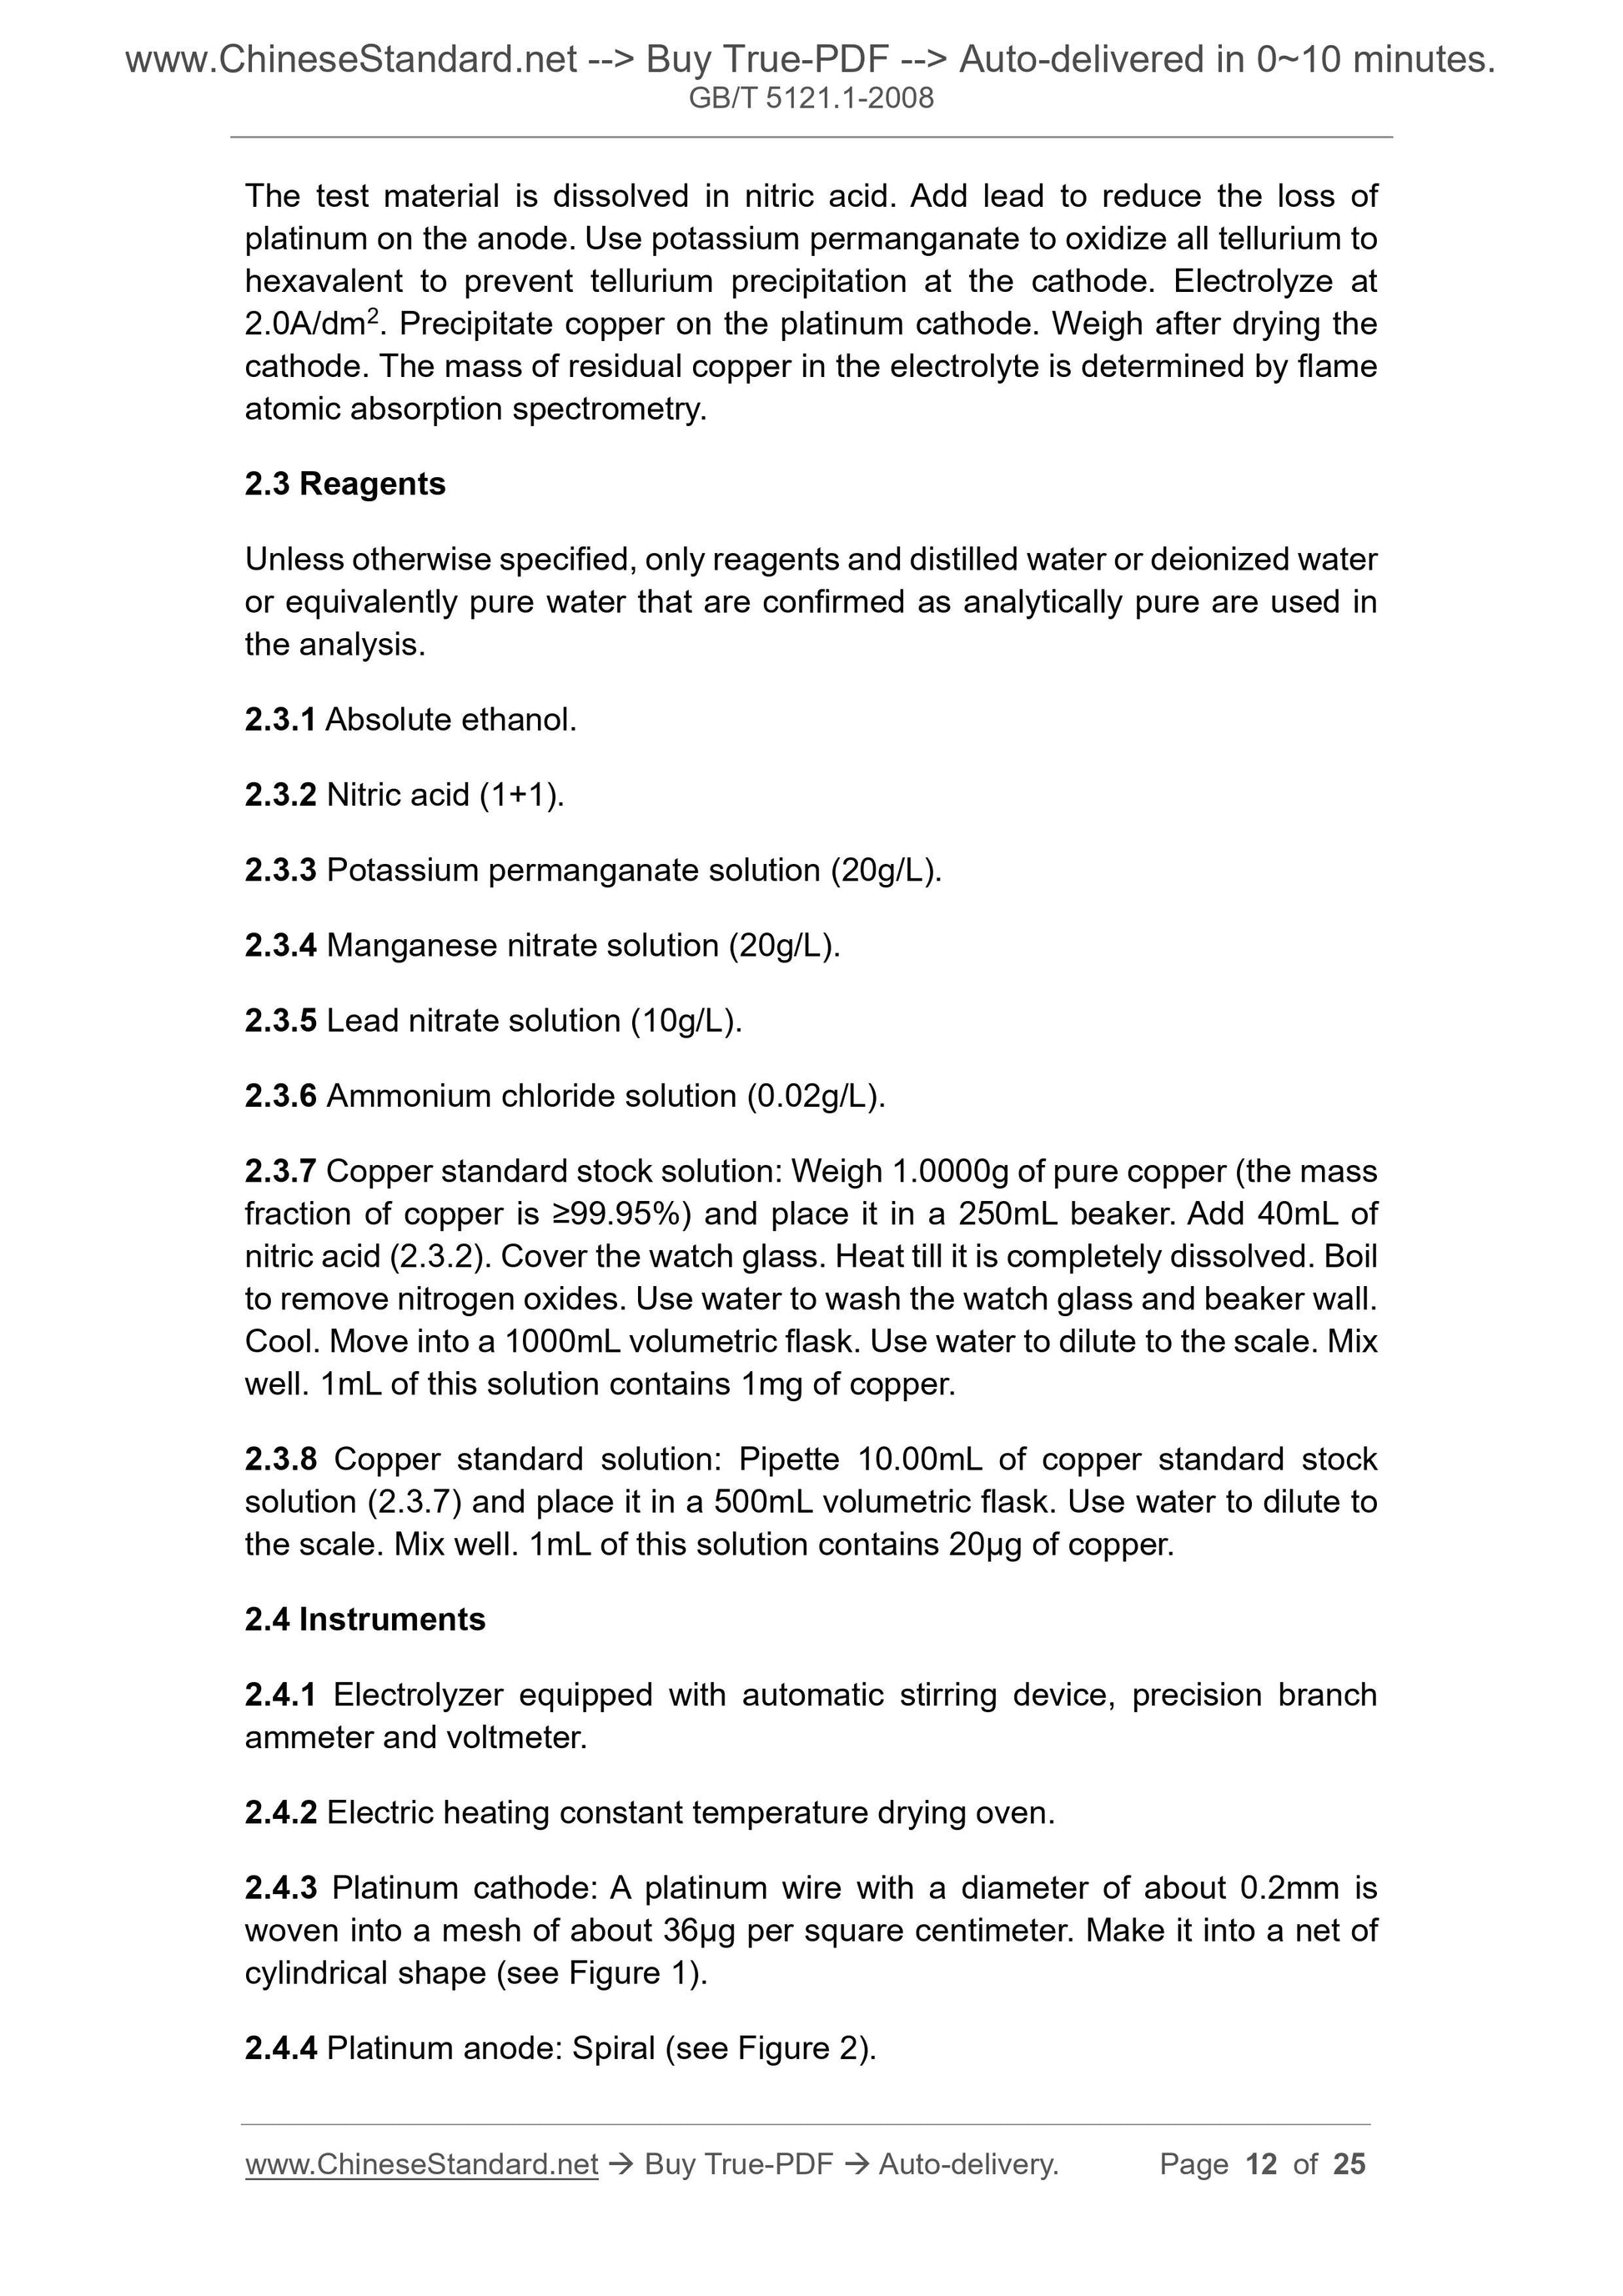 GB/T 5121.1-2008 Page 5